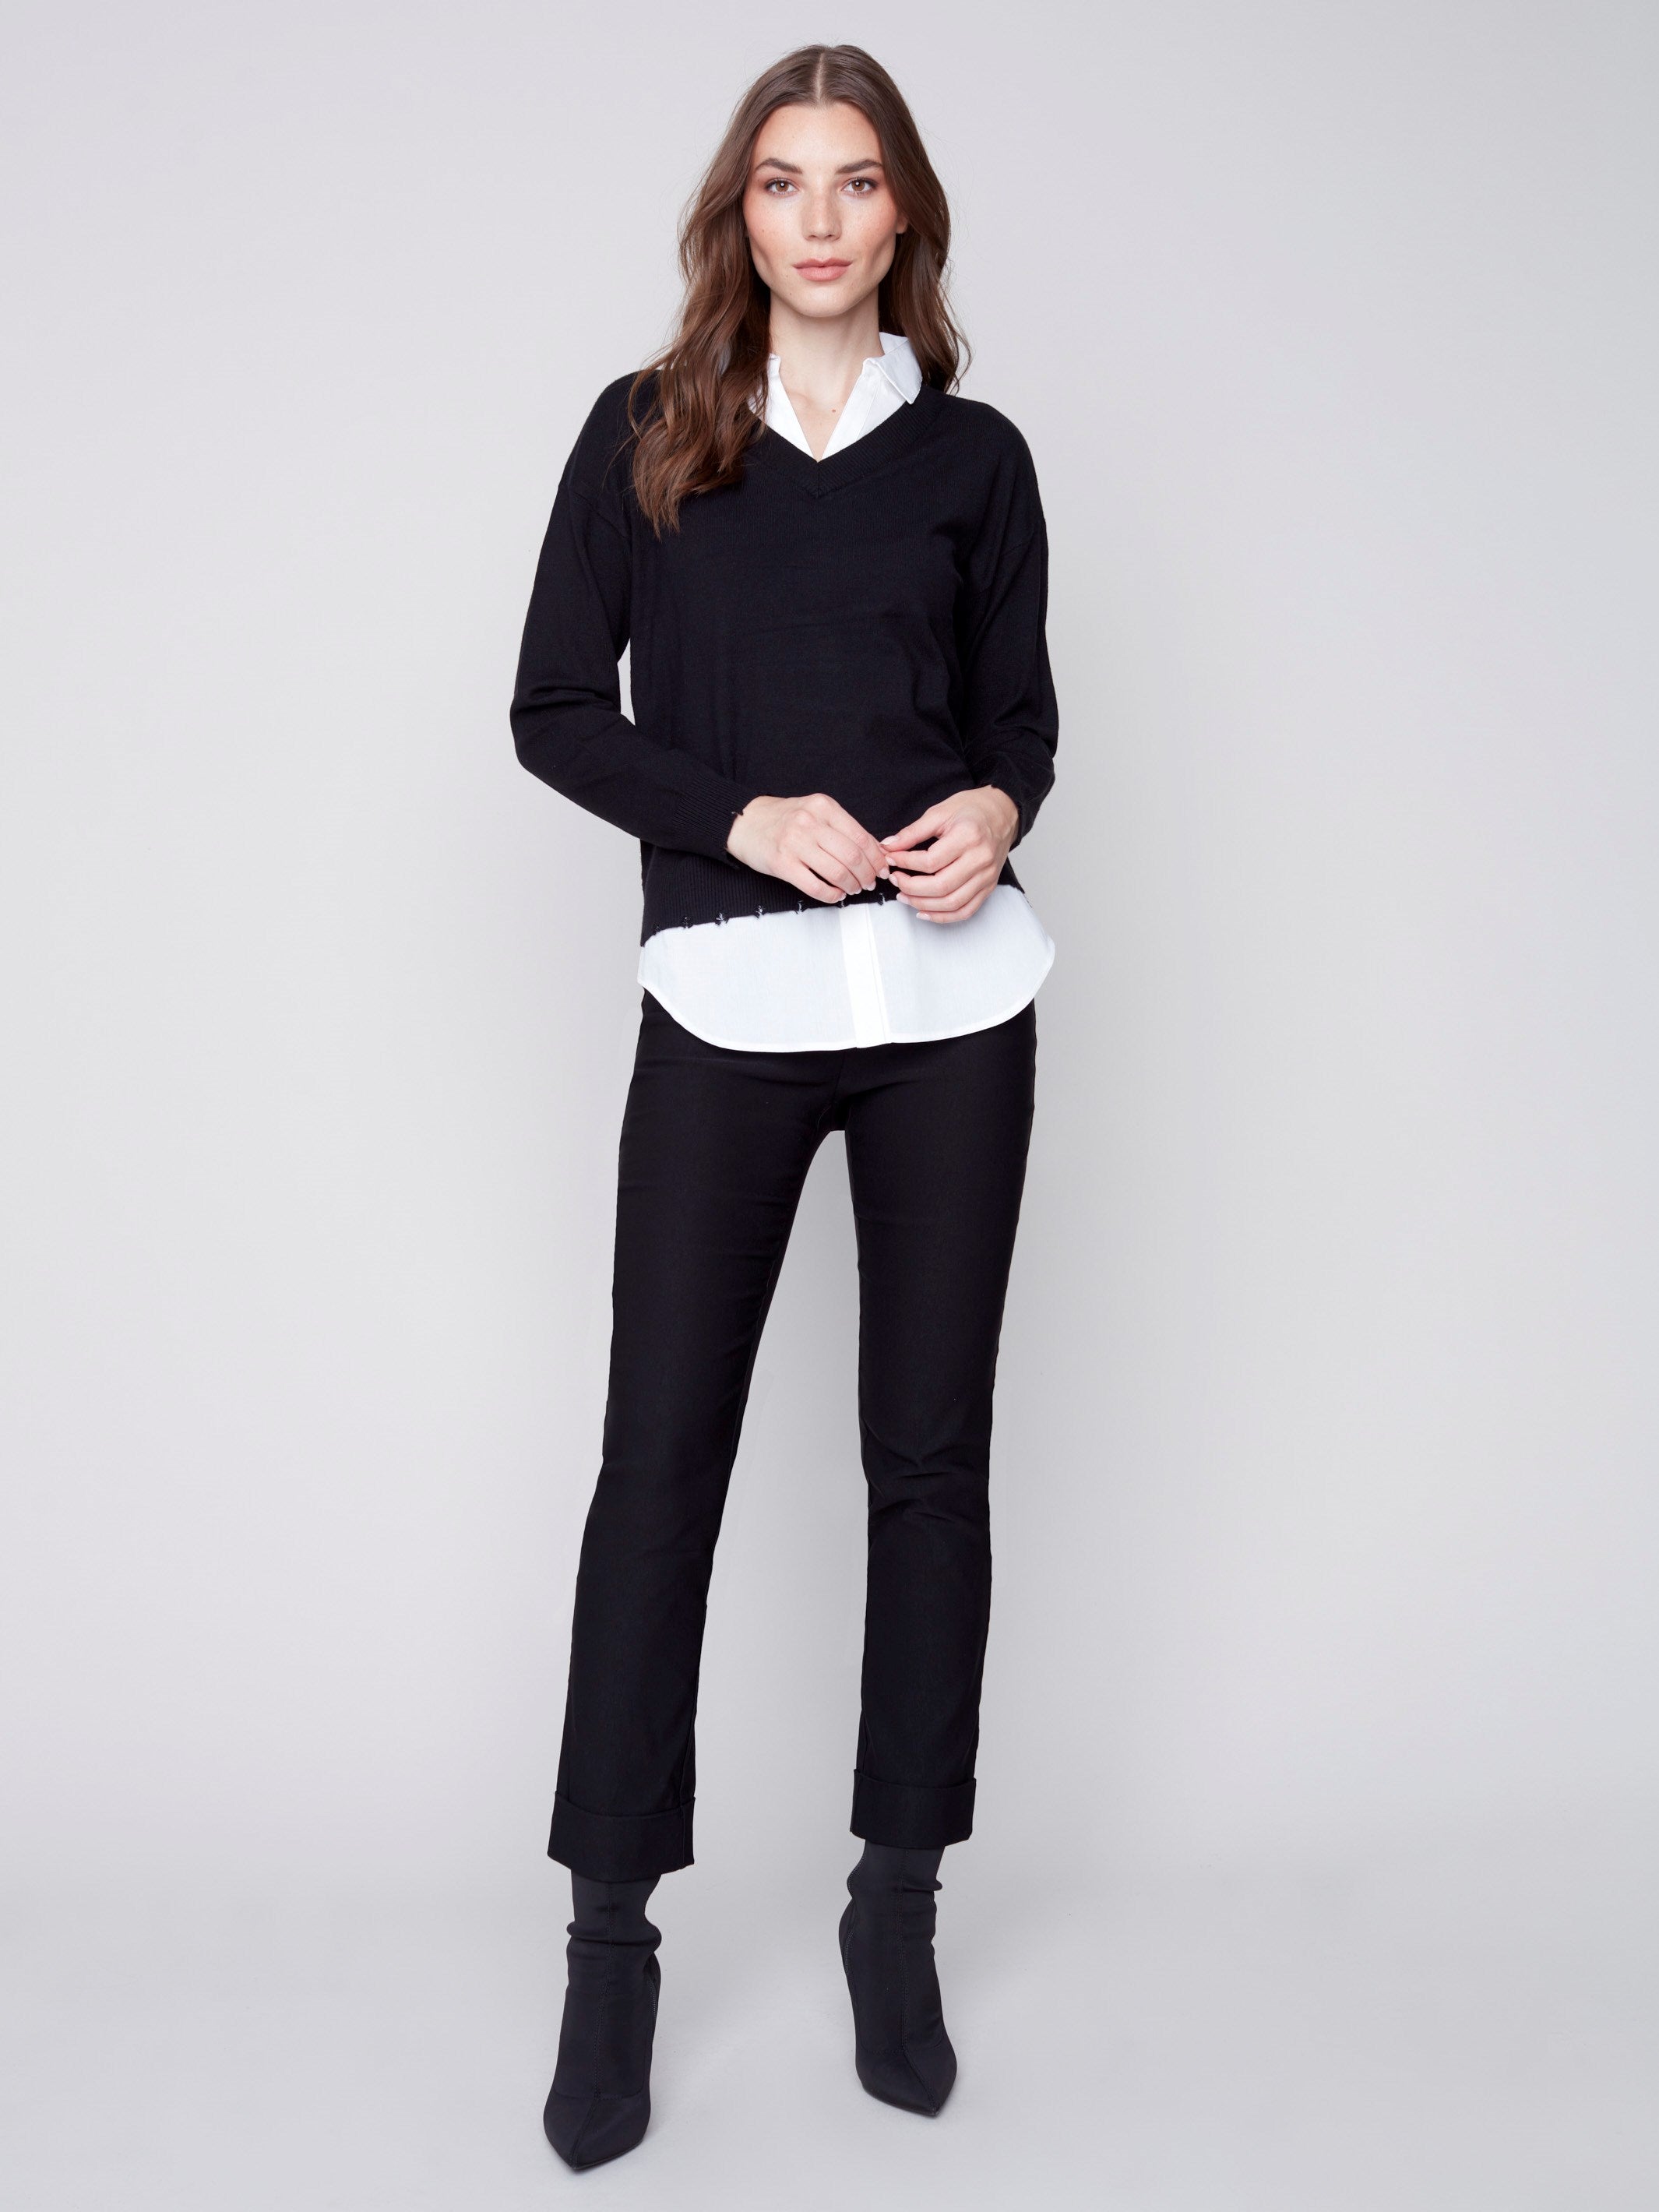 V-Neck Sweater with Shirt Collar - Black